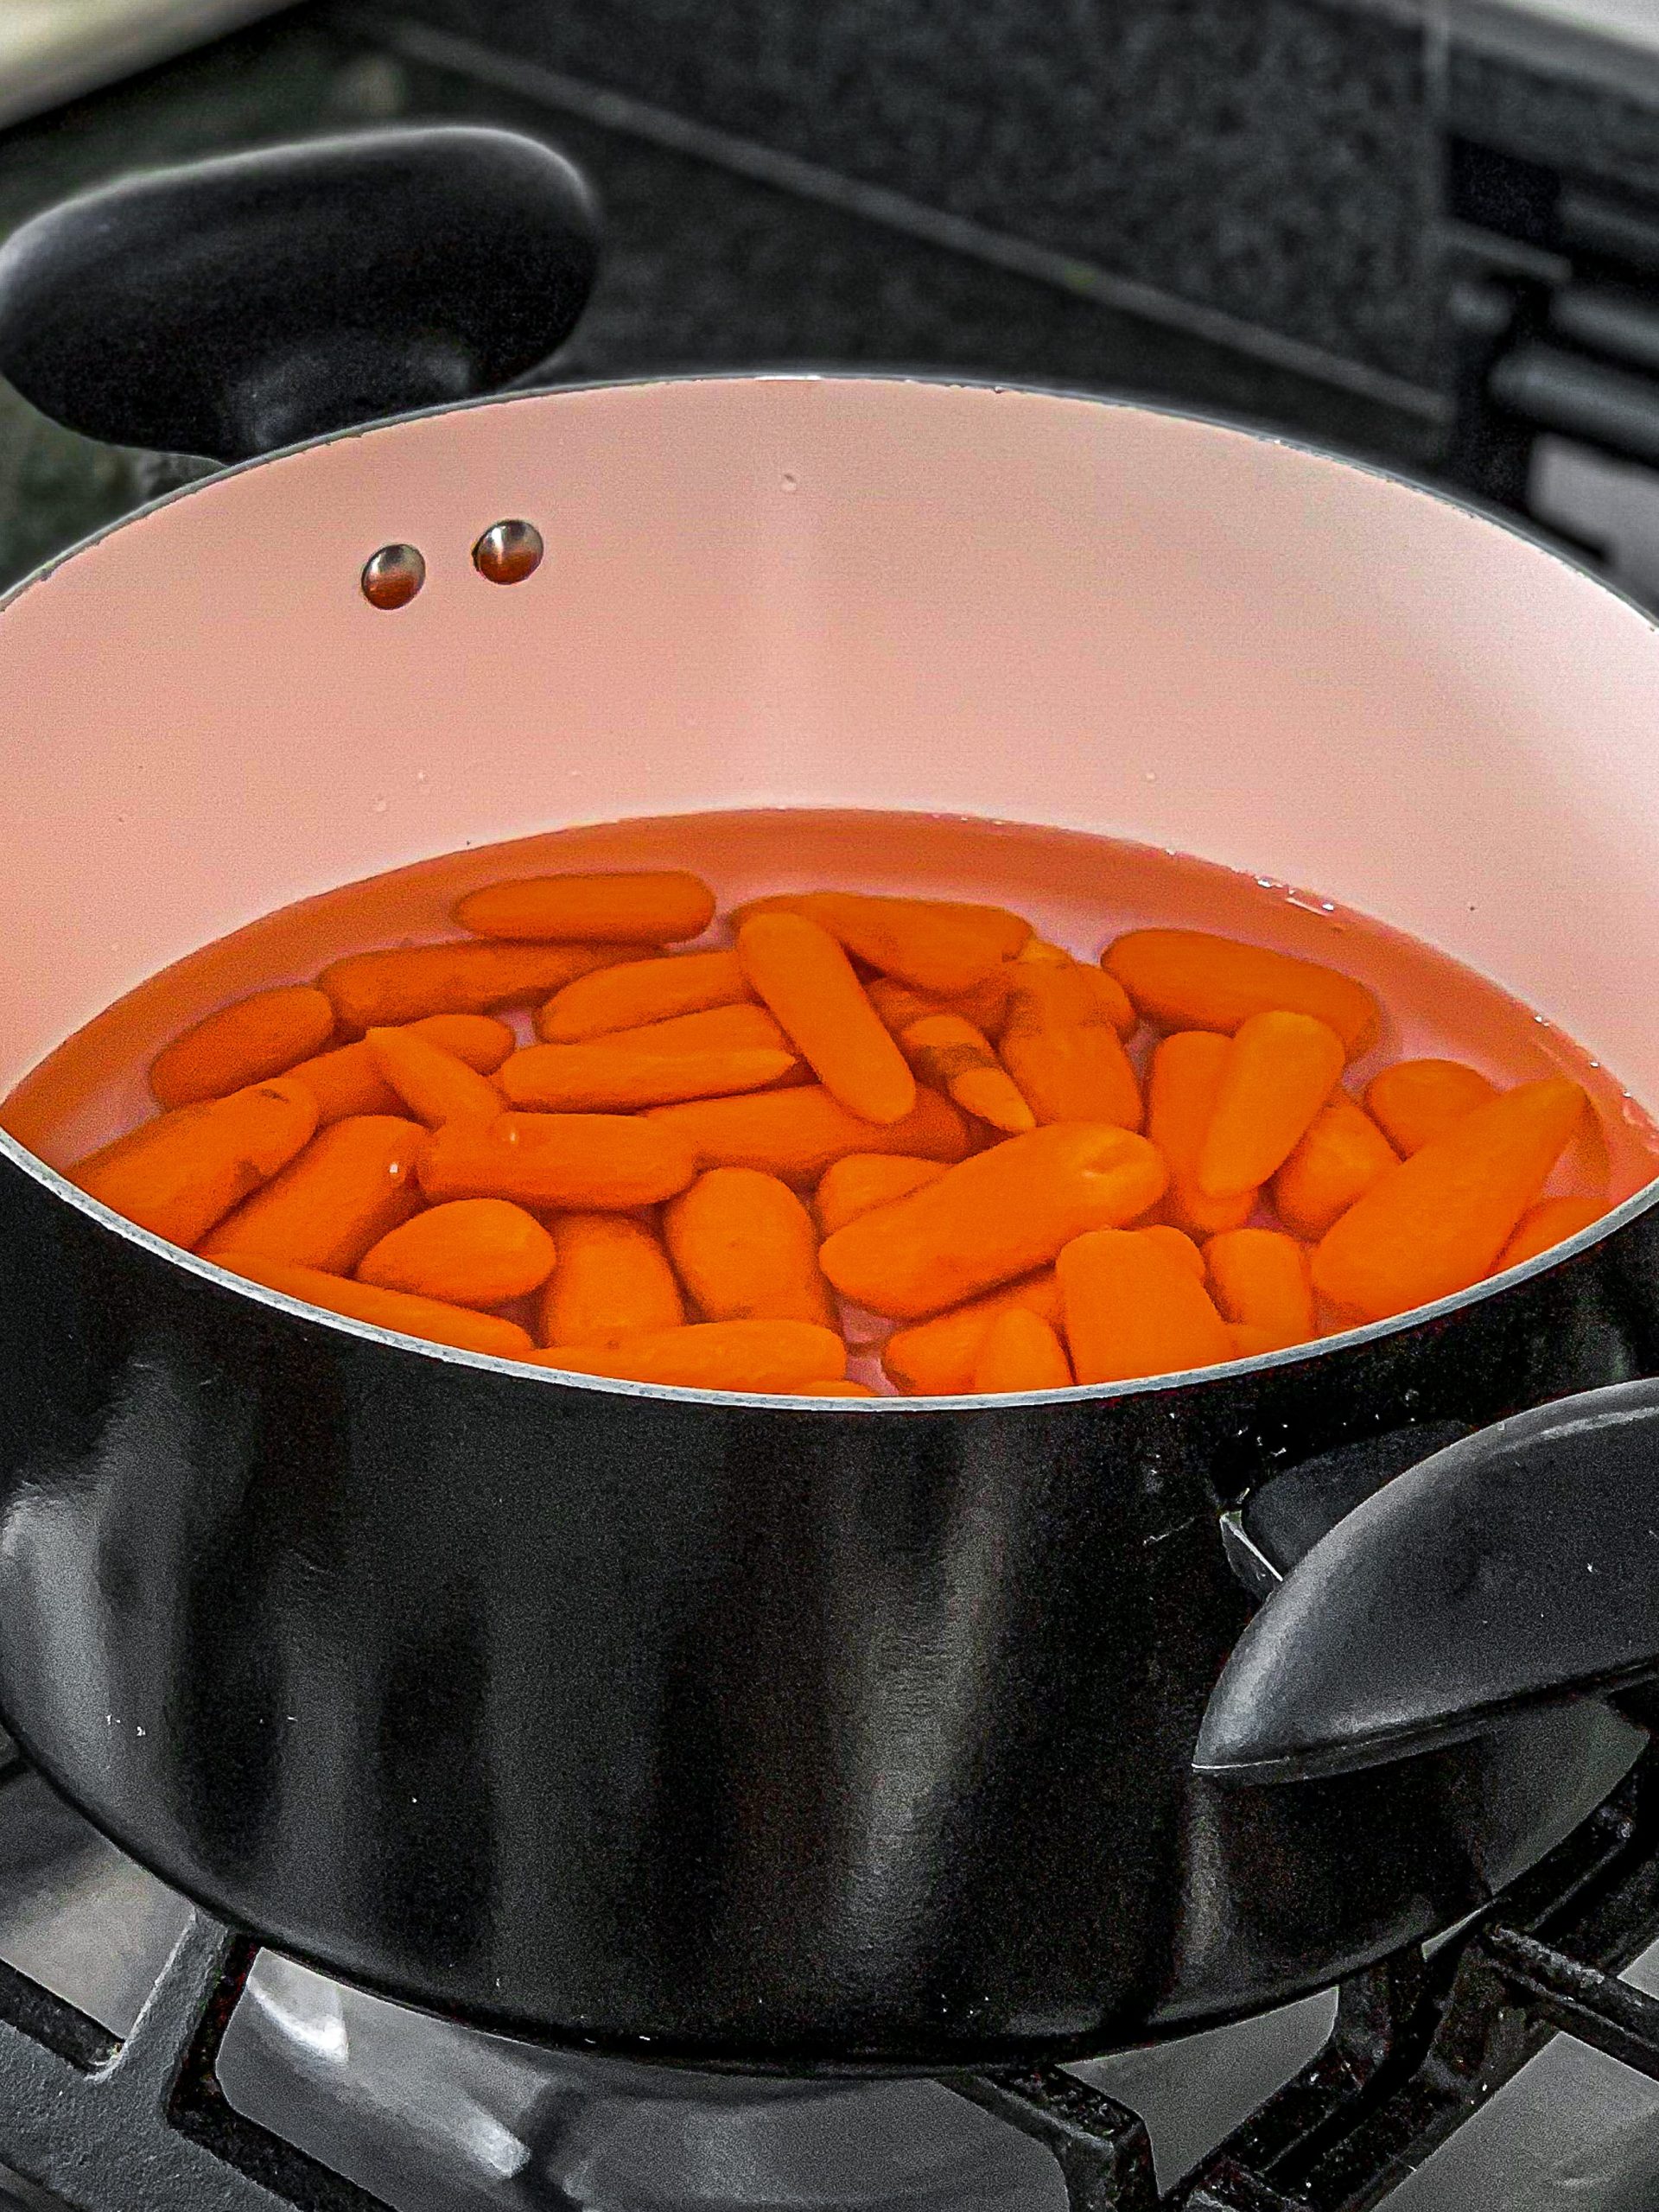 Add the carrots in a large saucepan over medium heat with 1-inch-deep water. Bring it to a boil.